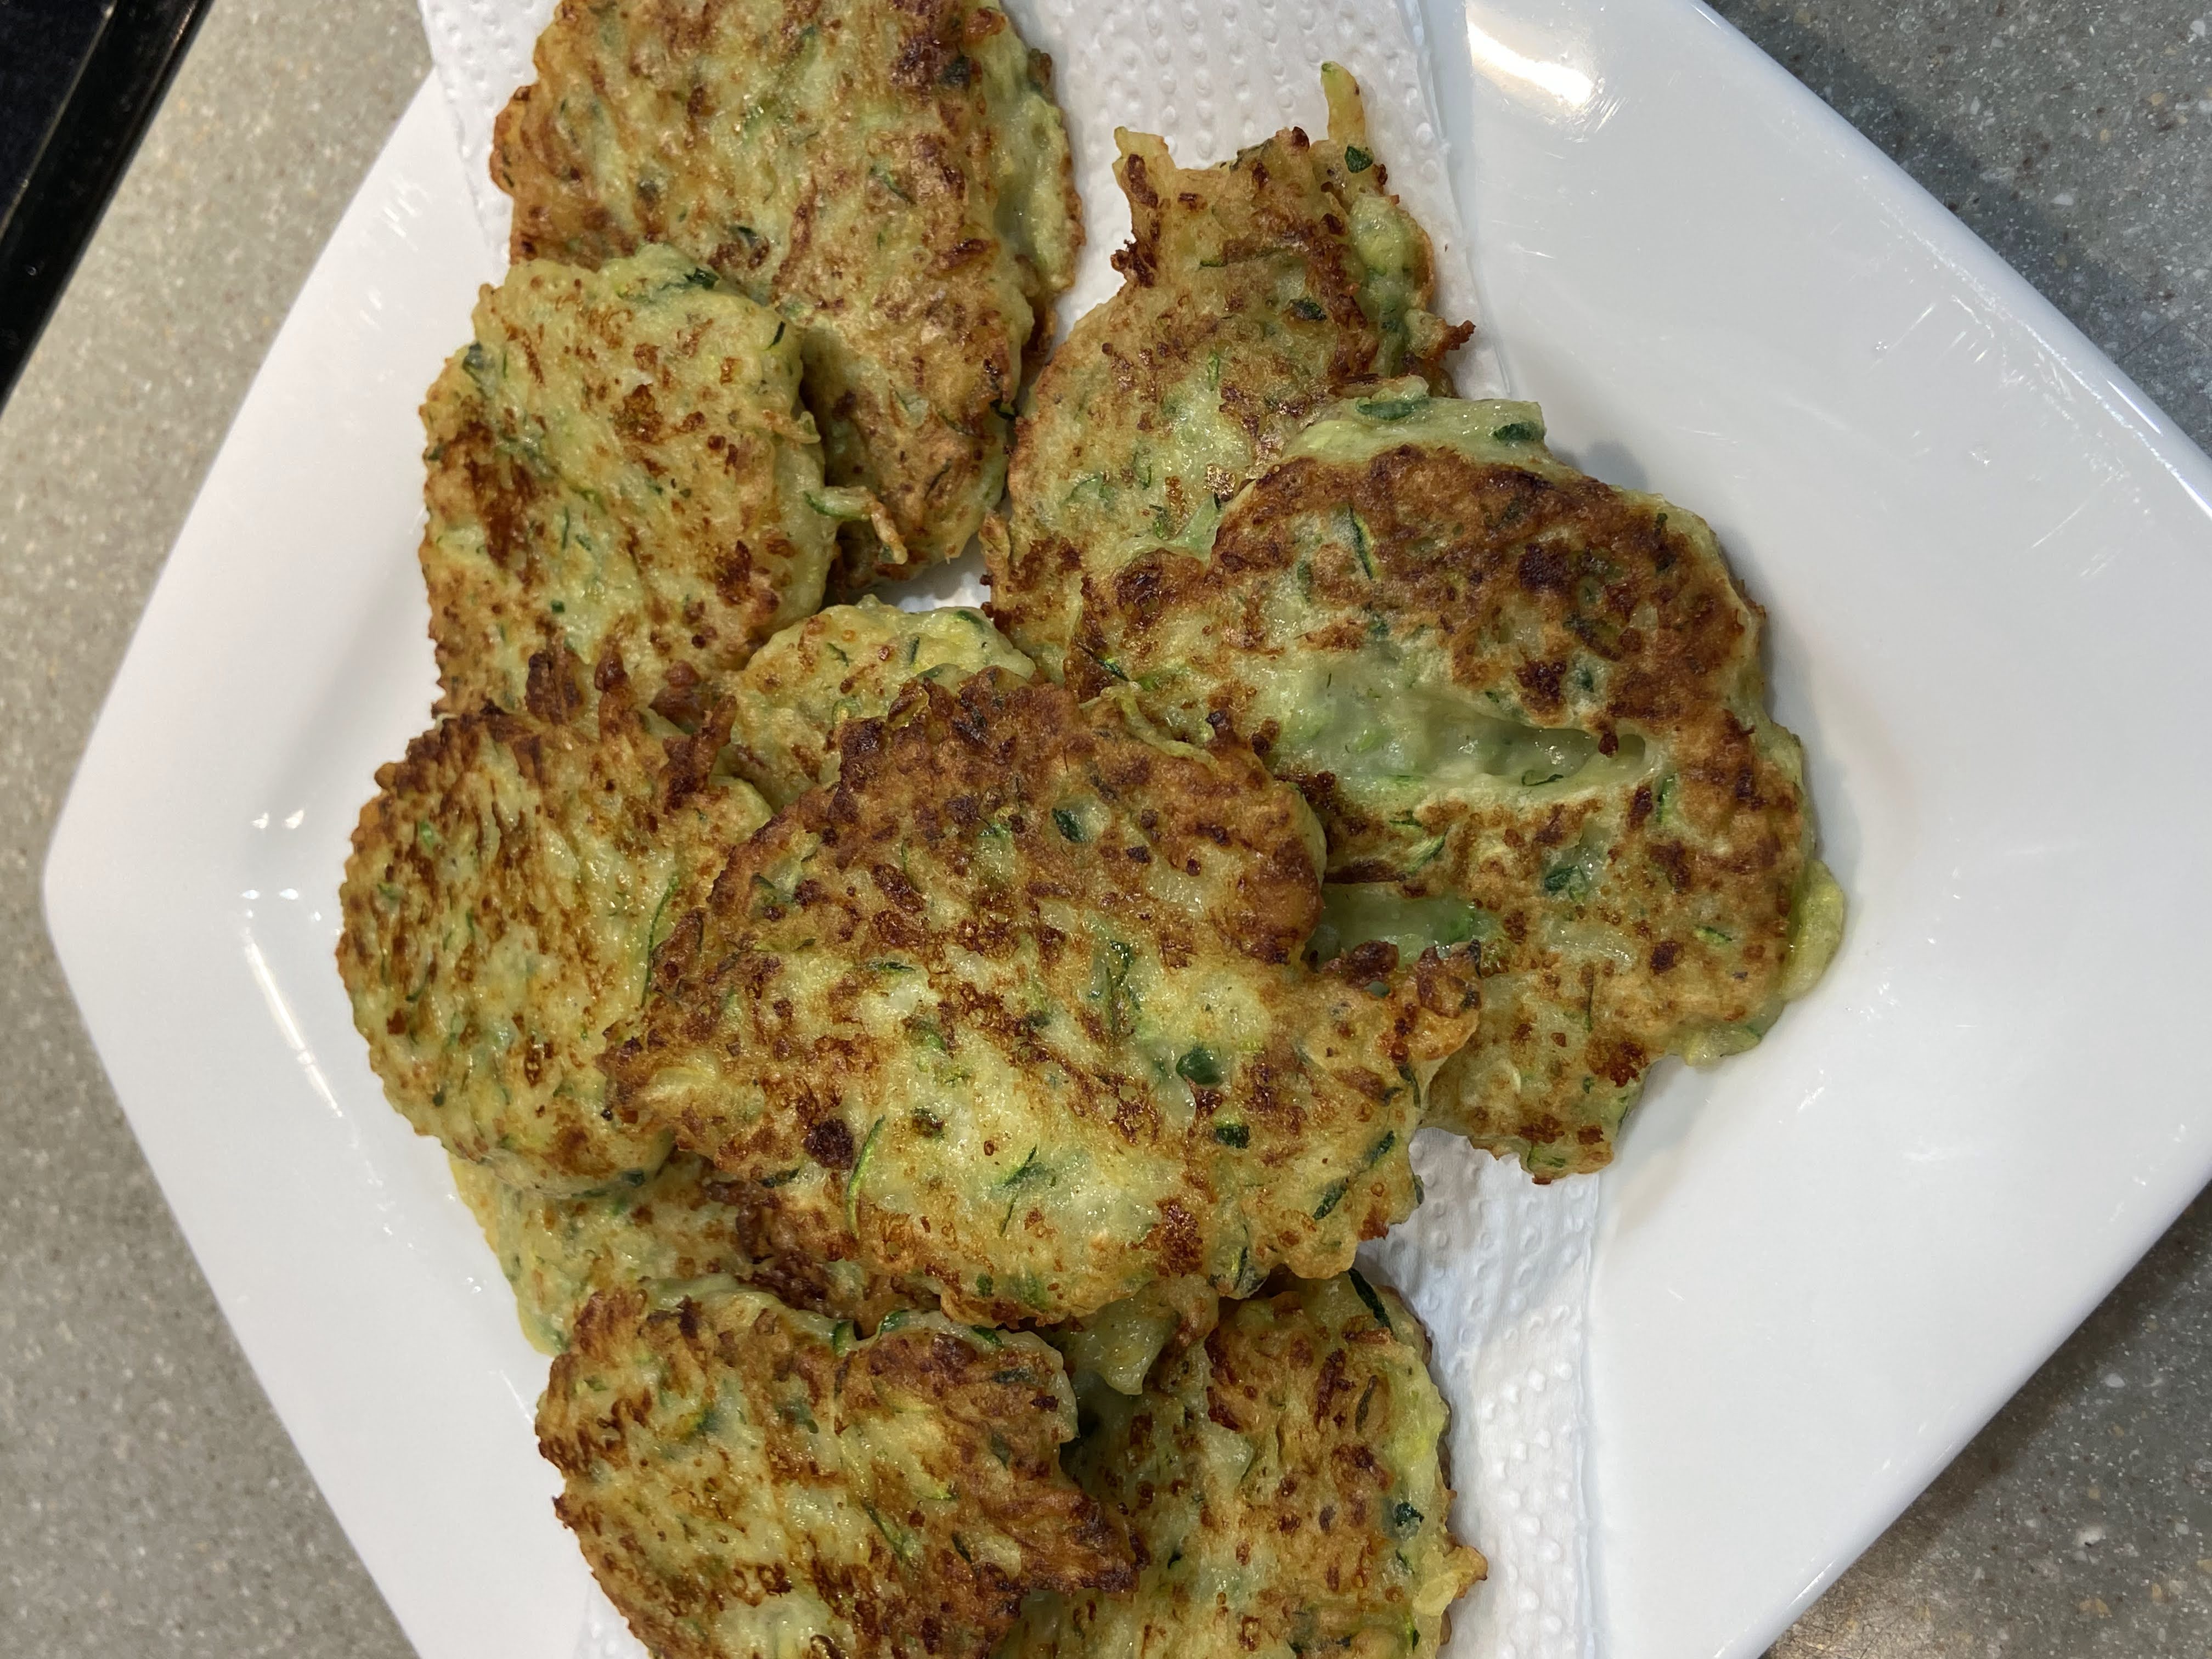 Zucchini fritters,
Zucchini fritters served on a plate